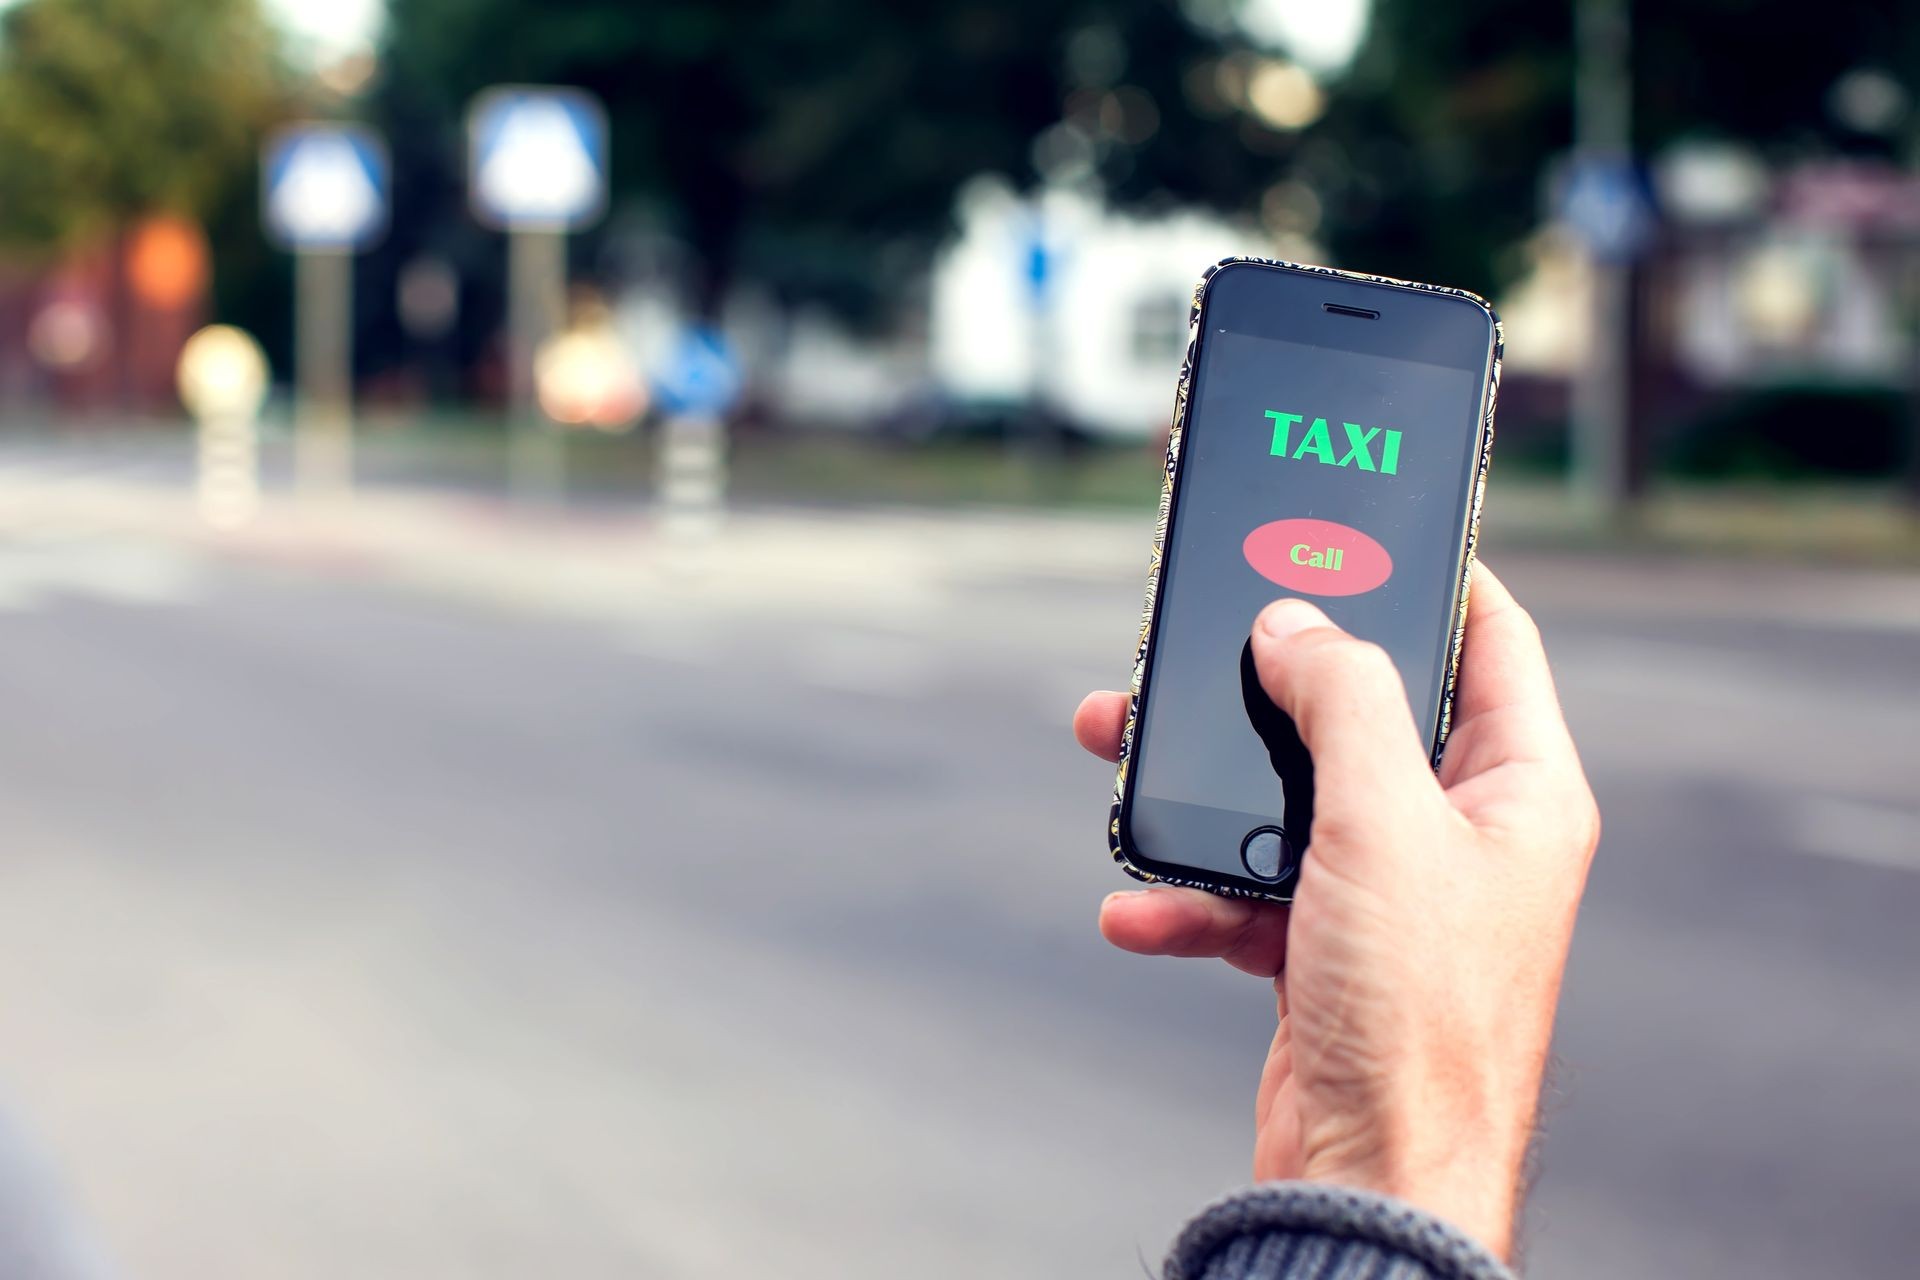 Male hand with smartphone on blurred road background. Taxi service application on the screen.